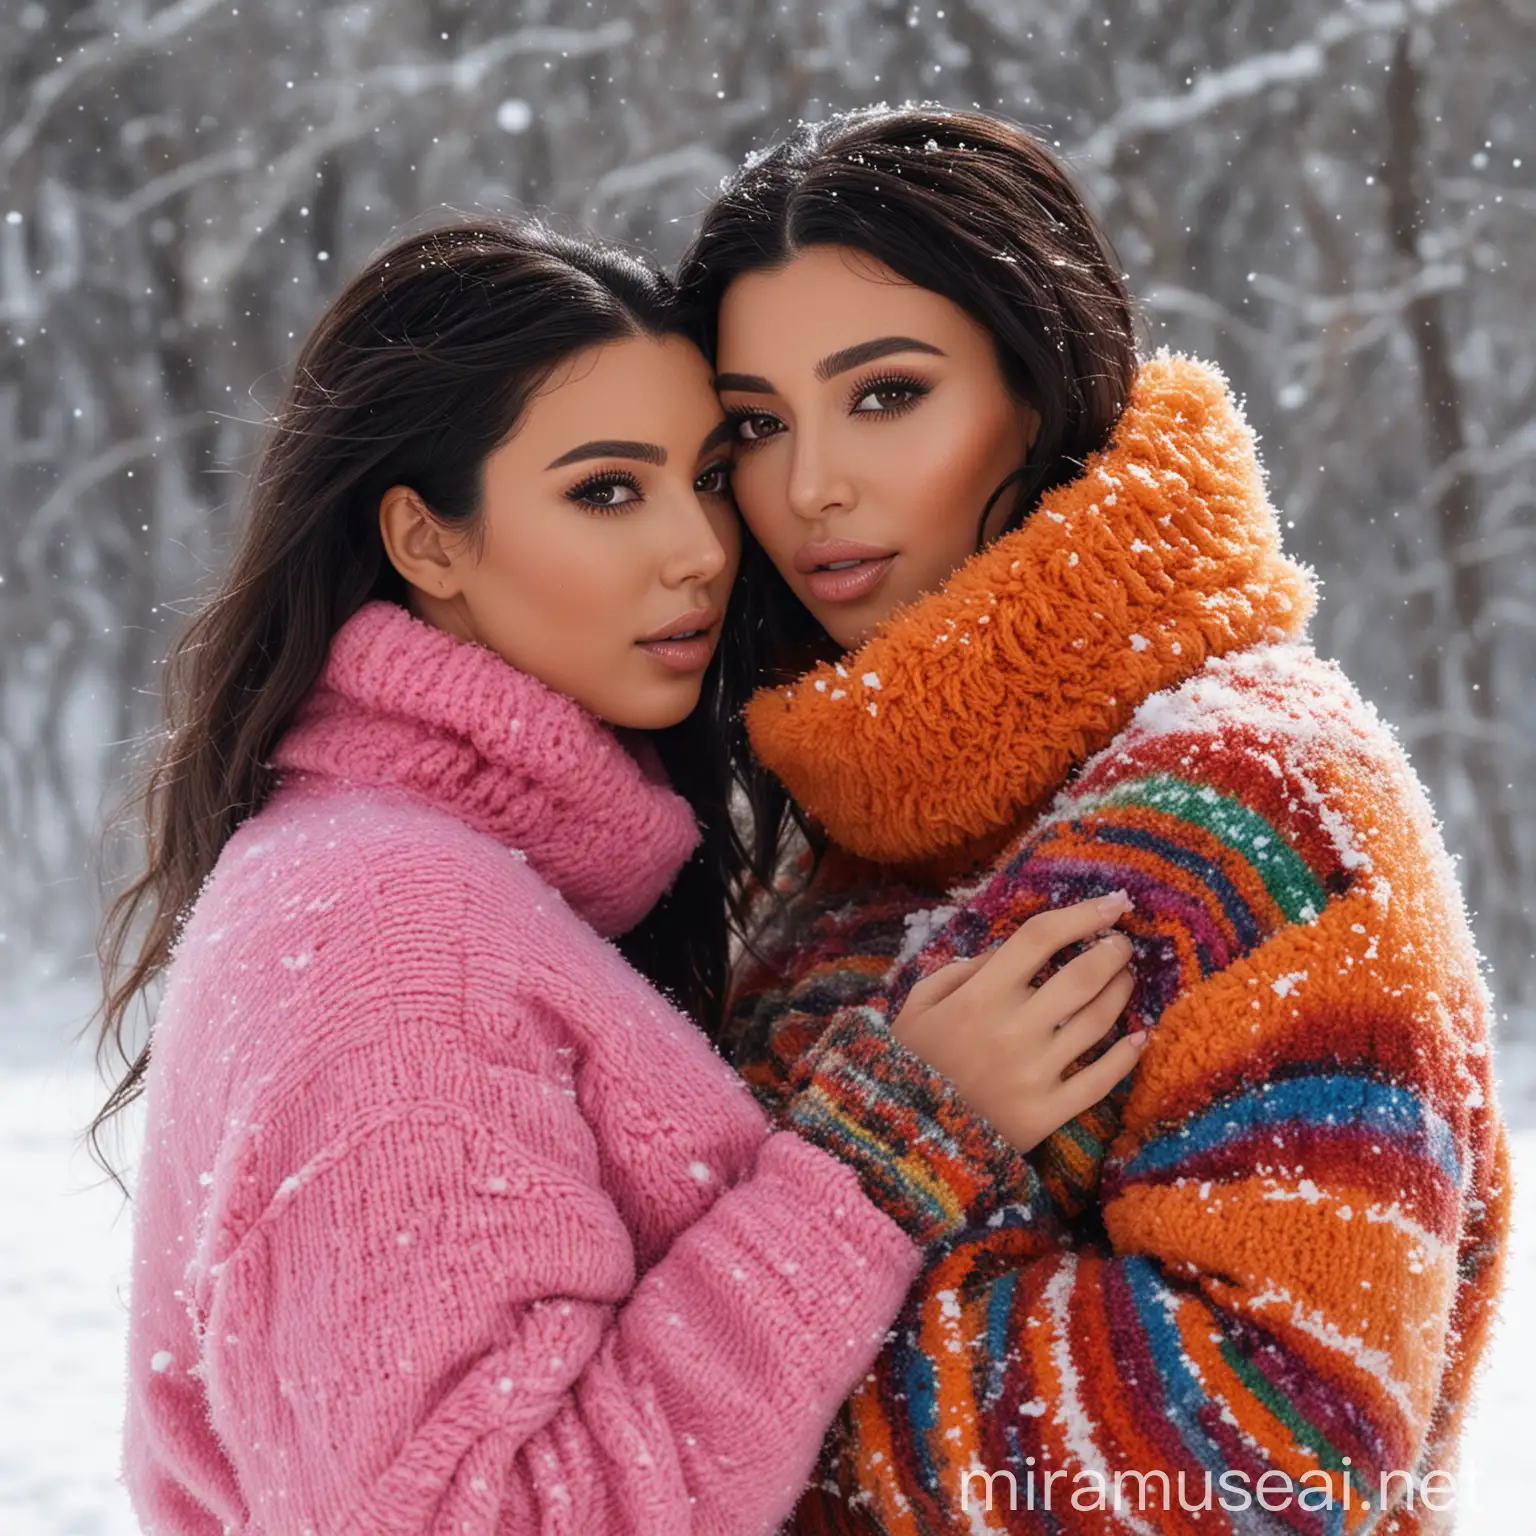 Kim kardashian and a brunette both wearing colorful fuzzy turtleneck sweaters and snuggling in the snow 